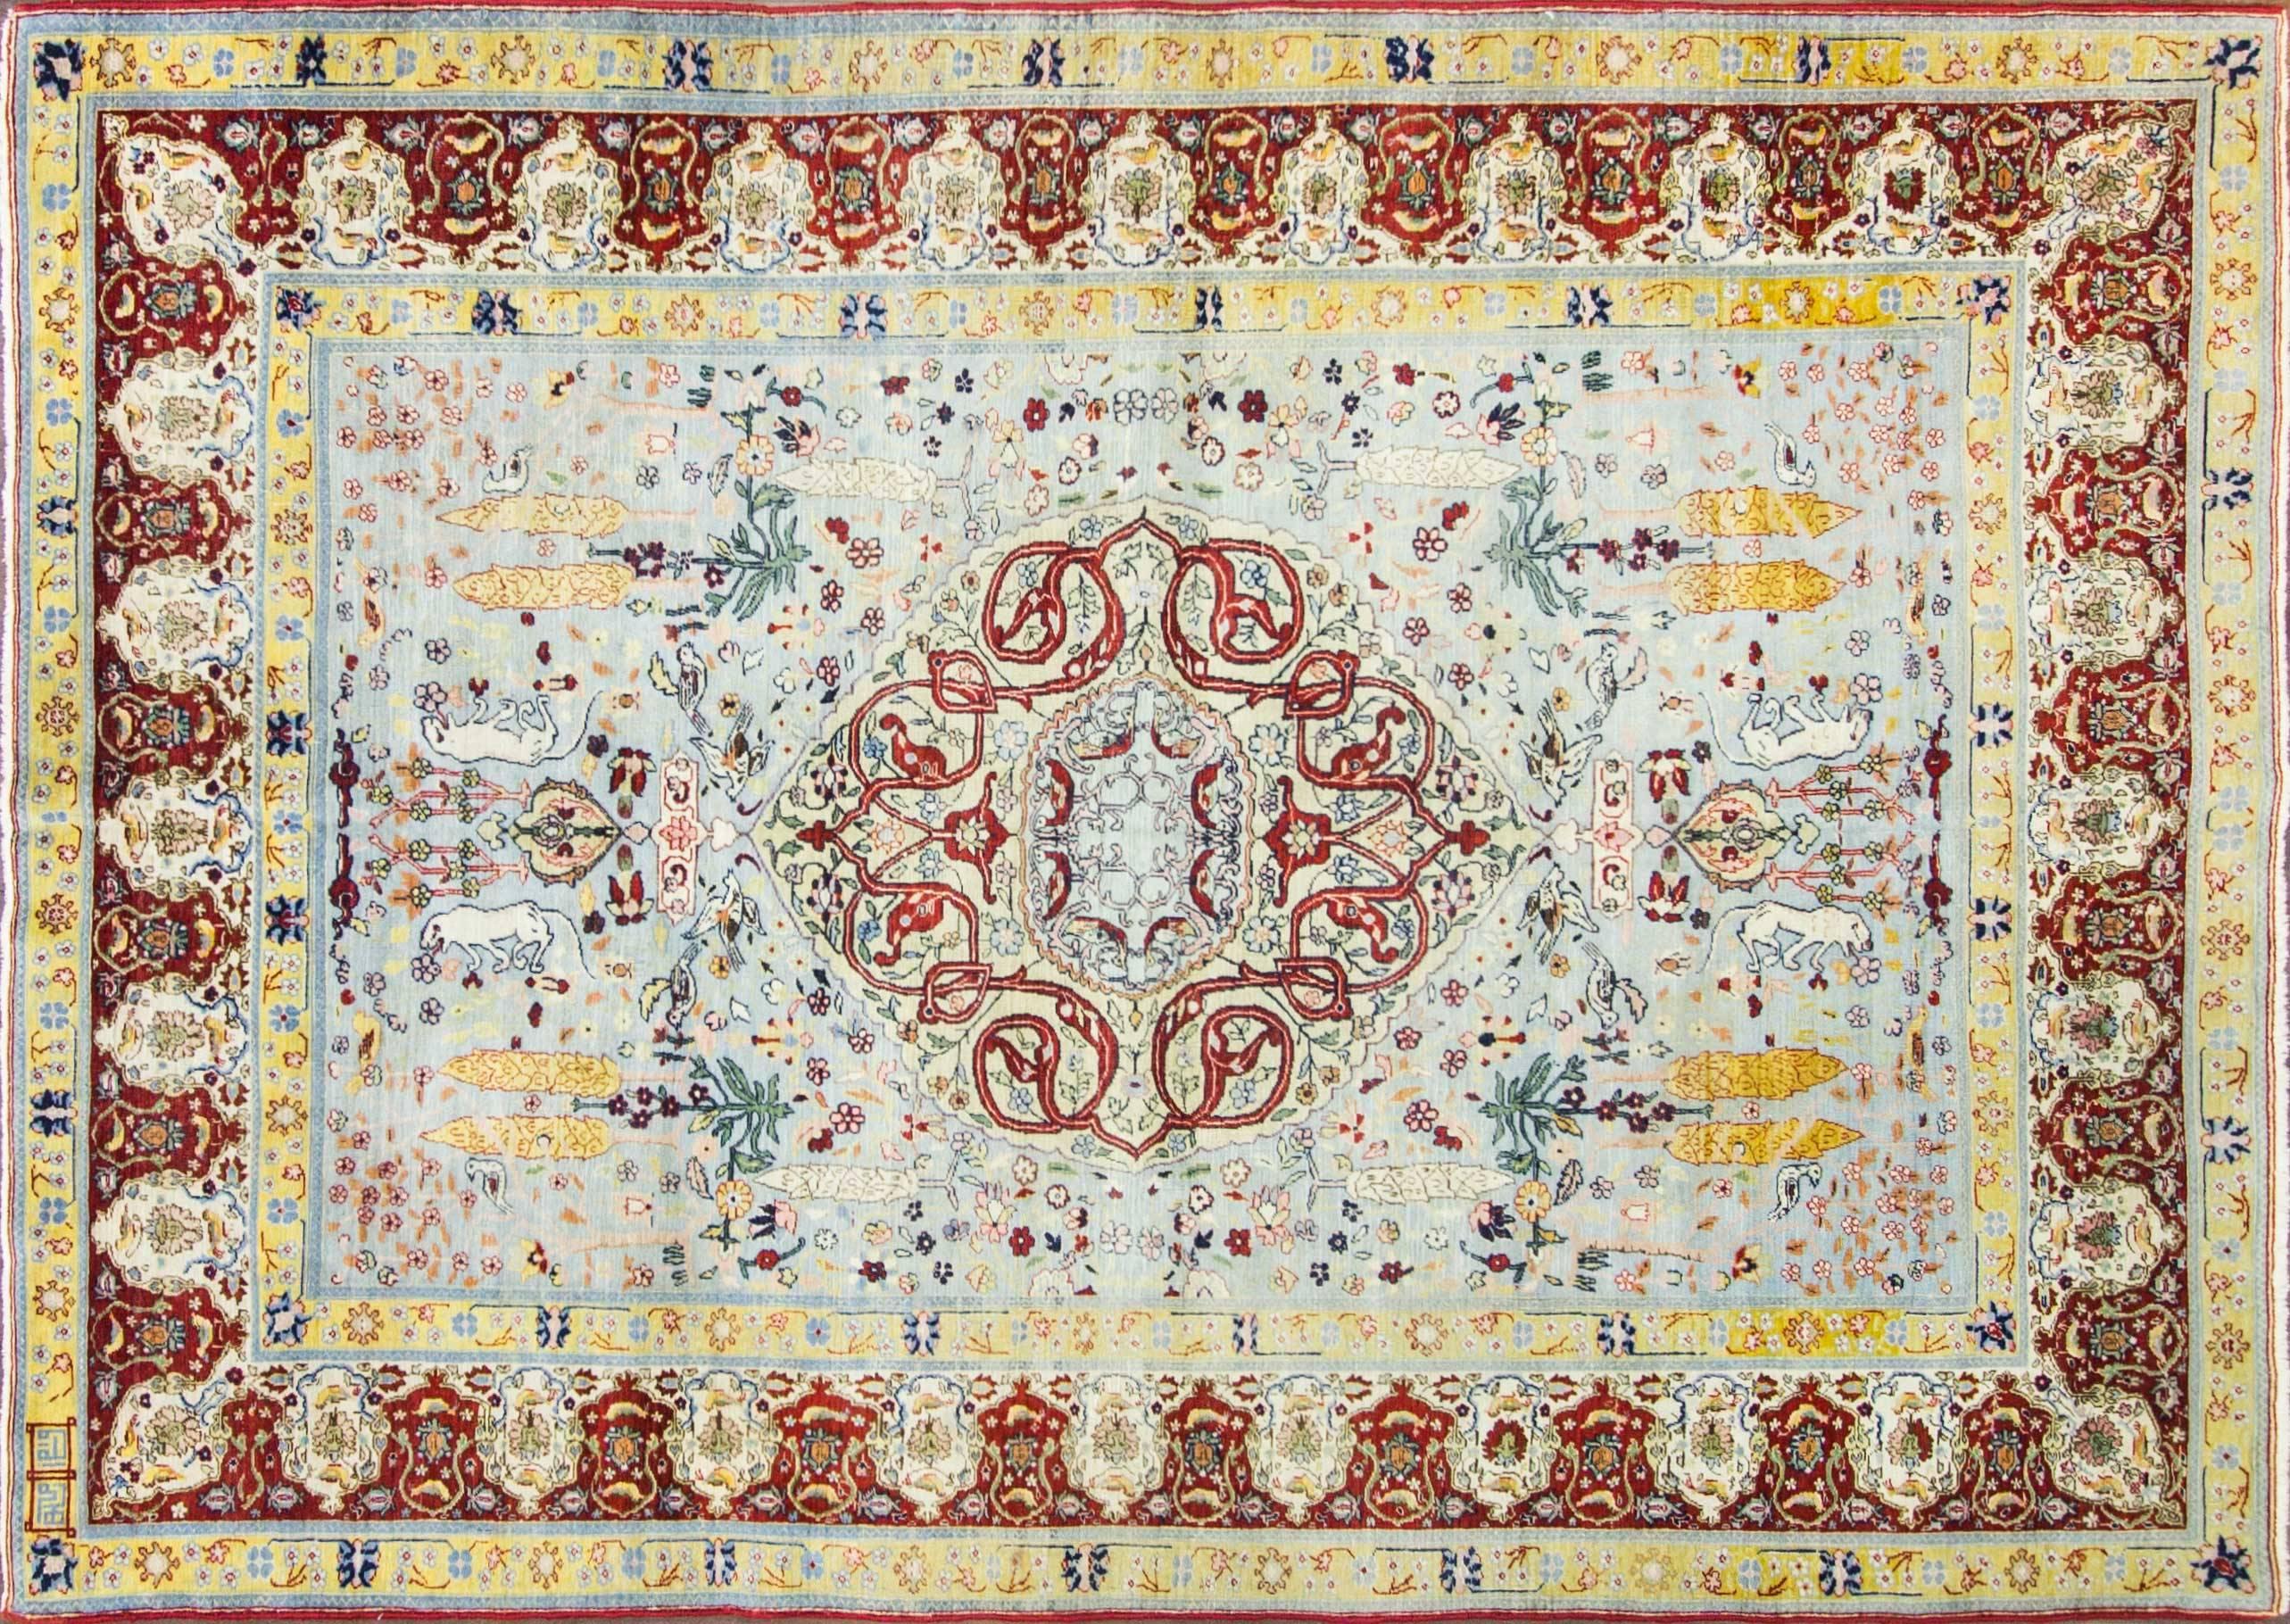 Stunning antique Hereke Carpet (Anatolian).
A court manufacturer was set up in the Izmit, Kerman weavers where imported to train the local weavers, therefore Kerman designs predominated.
The wool is very fine and it's very silky. Measure: 6'6